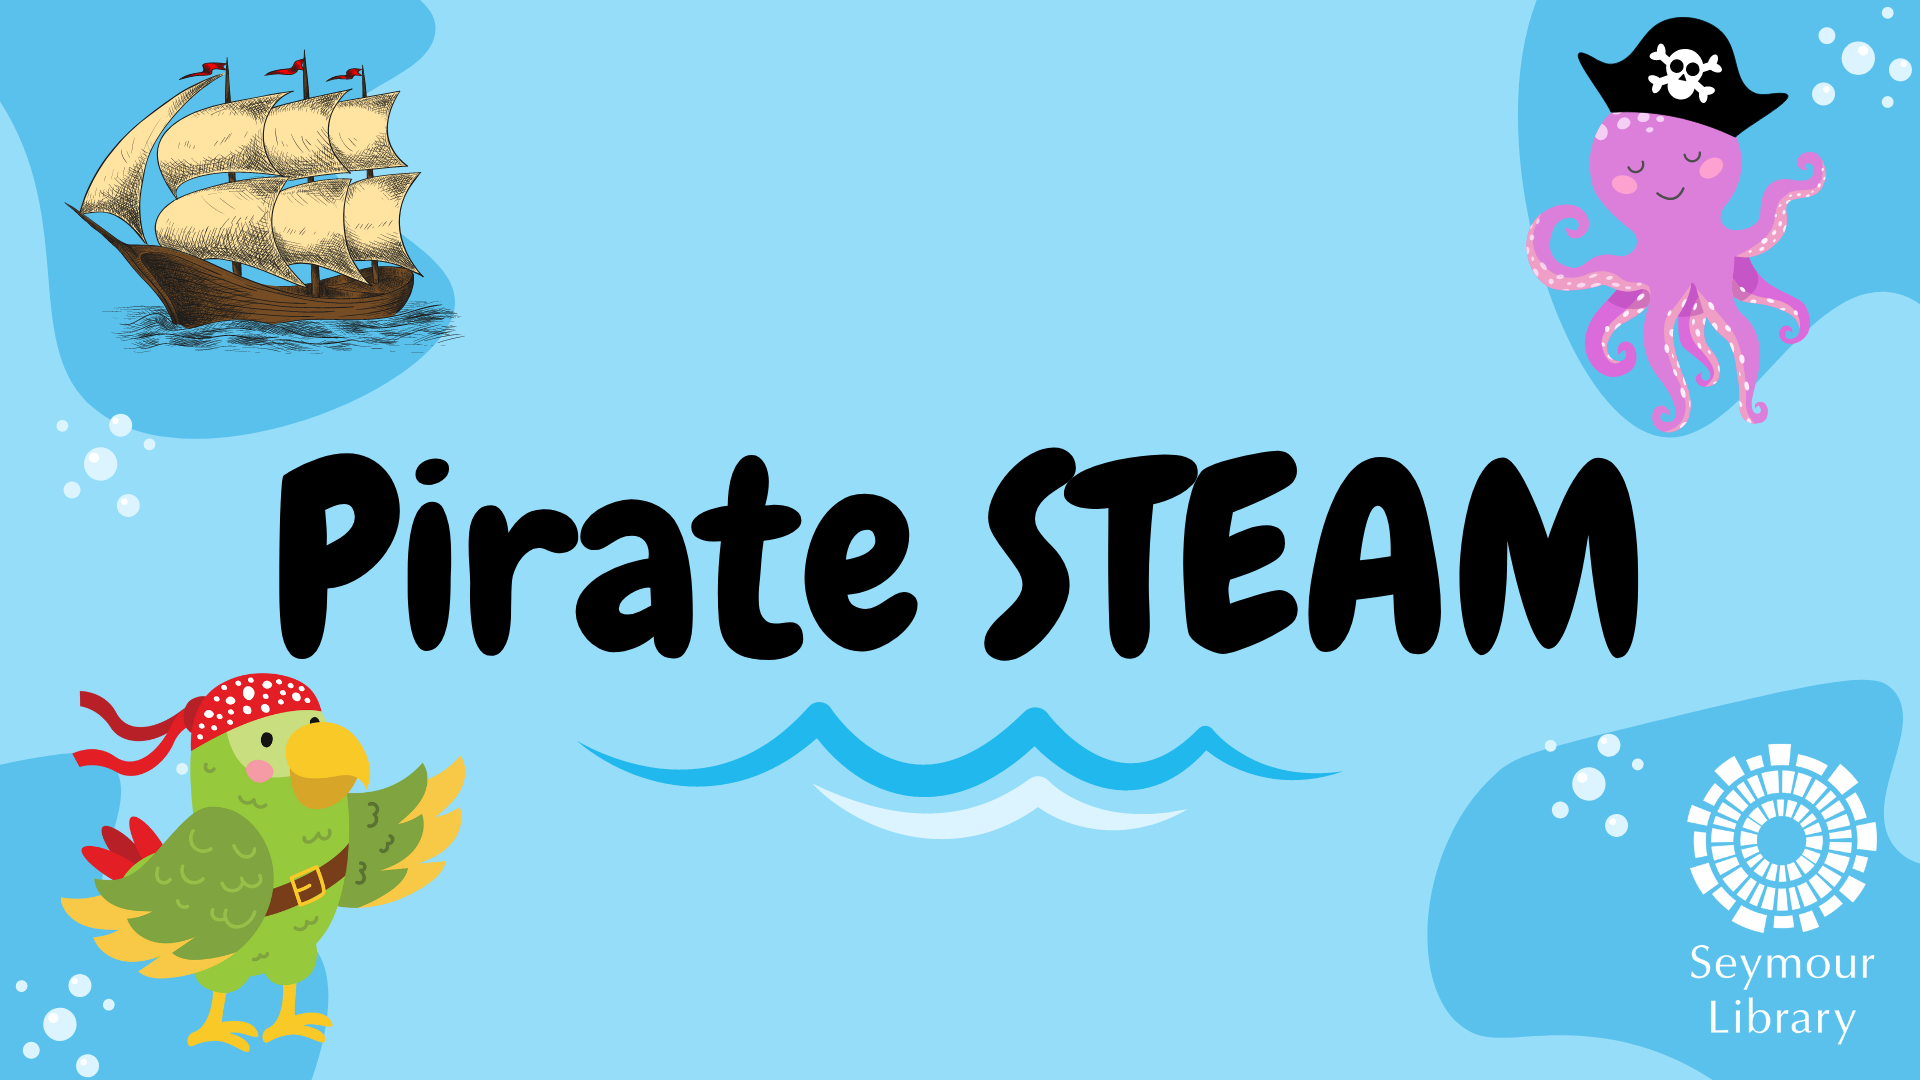 Pireate STEAM at Seymour Library. Graphic with pirate ship, parrot dressed as a pirate, and octopus wearing a pirate hat, and the Seymour Library Logo.